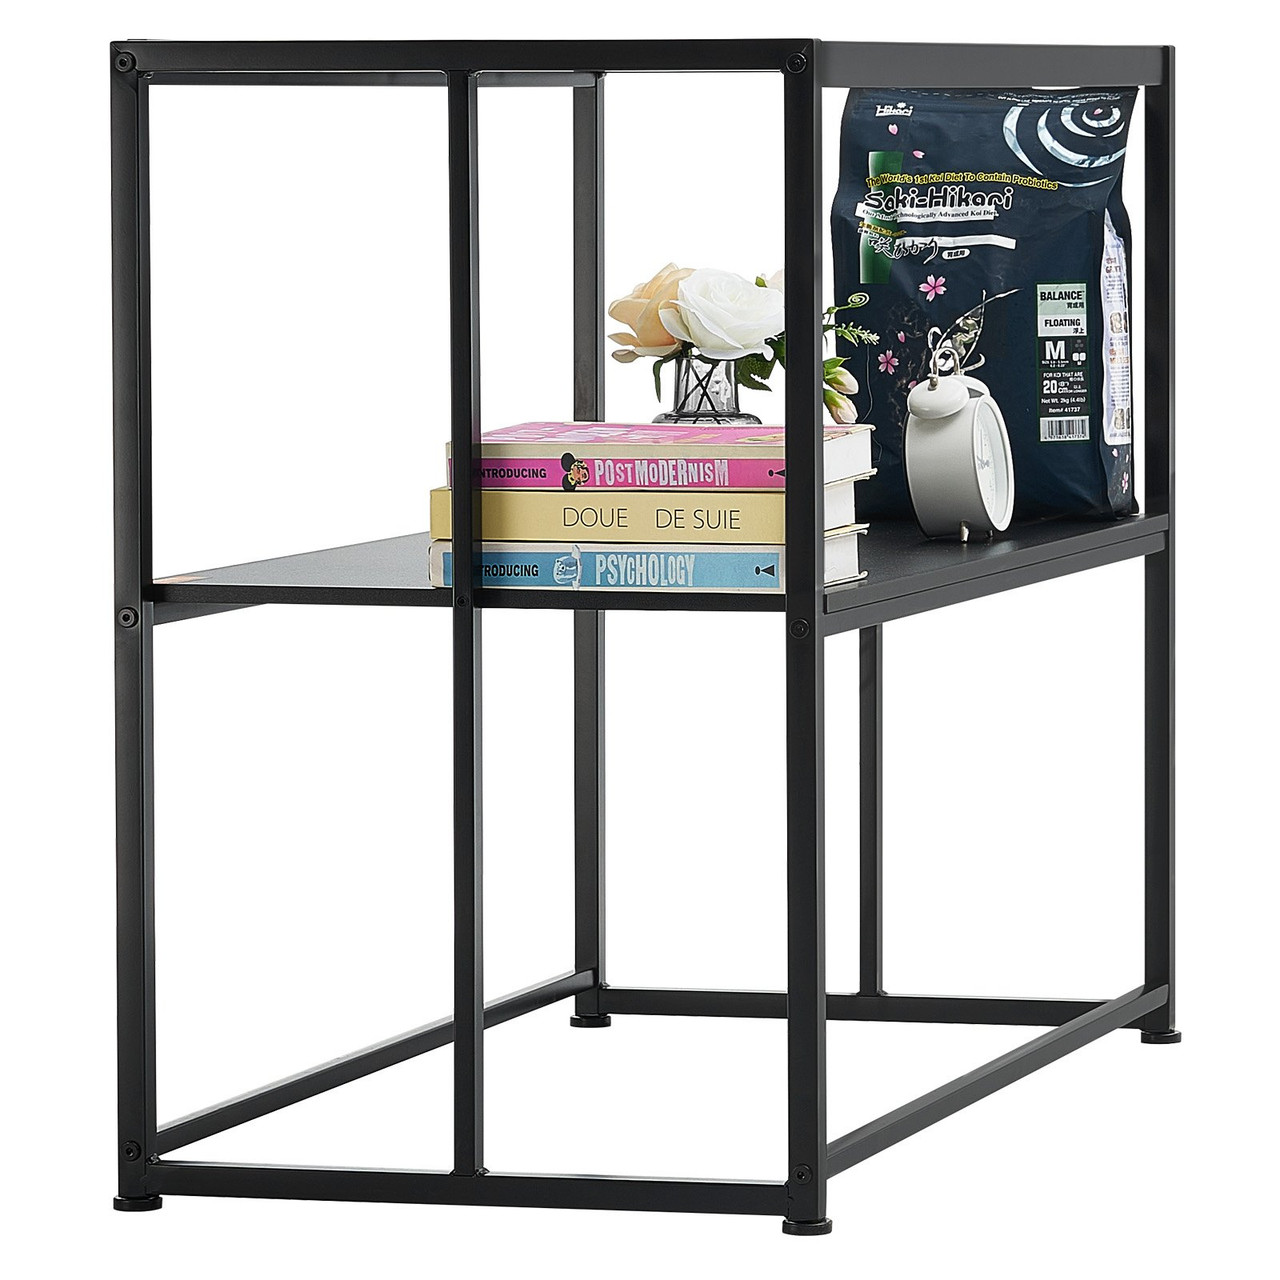 VEVOR Aquarium Stand, 40 Gallon Fish Tank Stand, 36.5 x 18.5 x 29.5 in Steel Turtle Tank Stand, 335 lbs Load Capacity, Reptile Tank Stand with Storage, Hardware Kit, and Non-slip Feet, Black